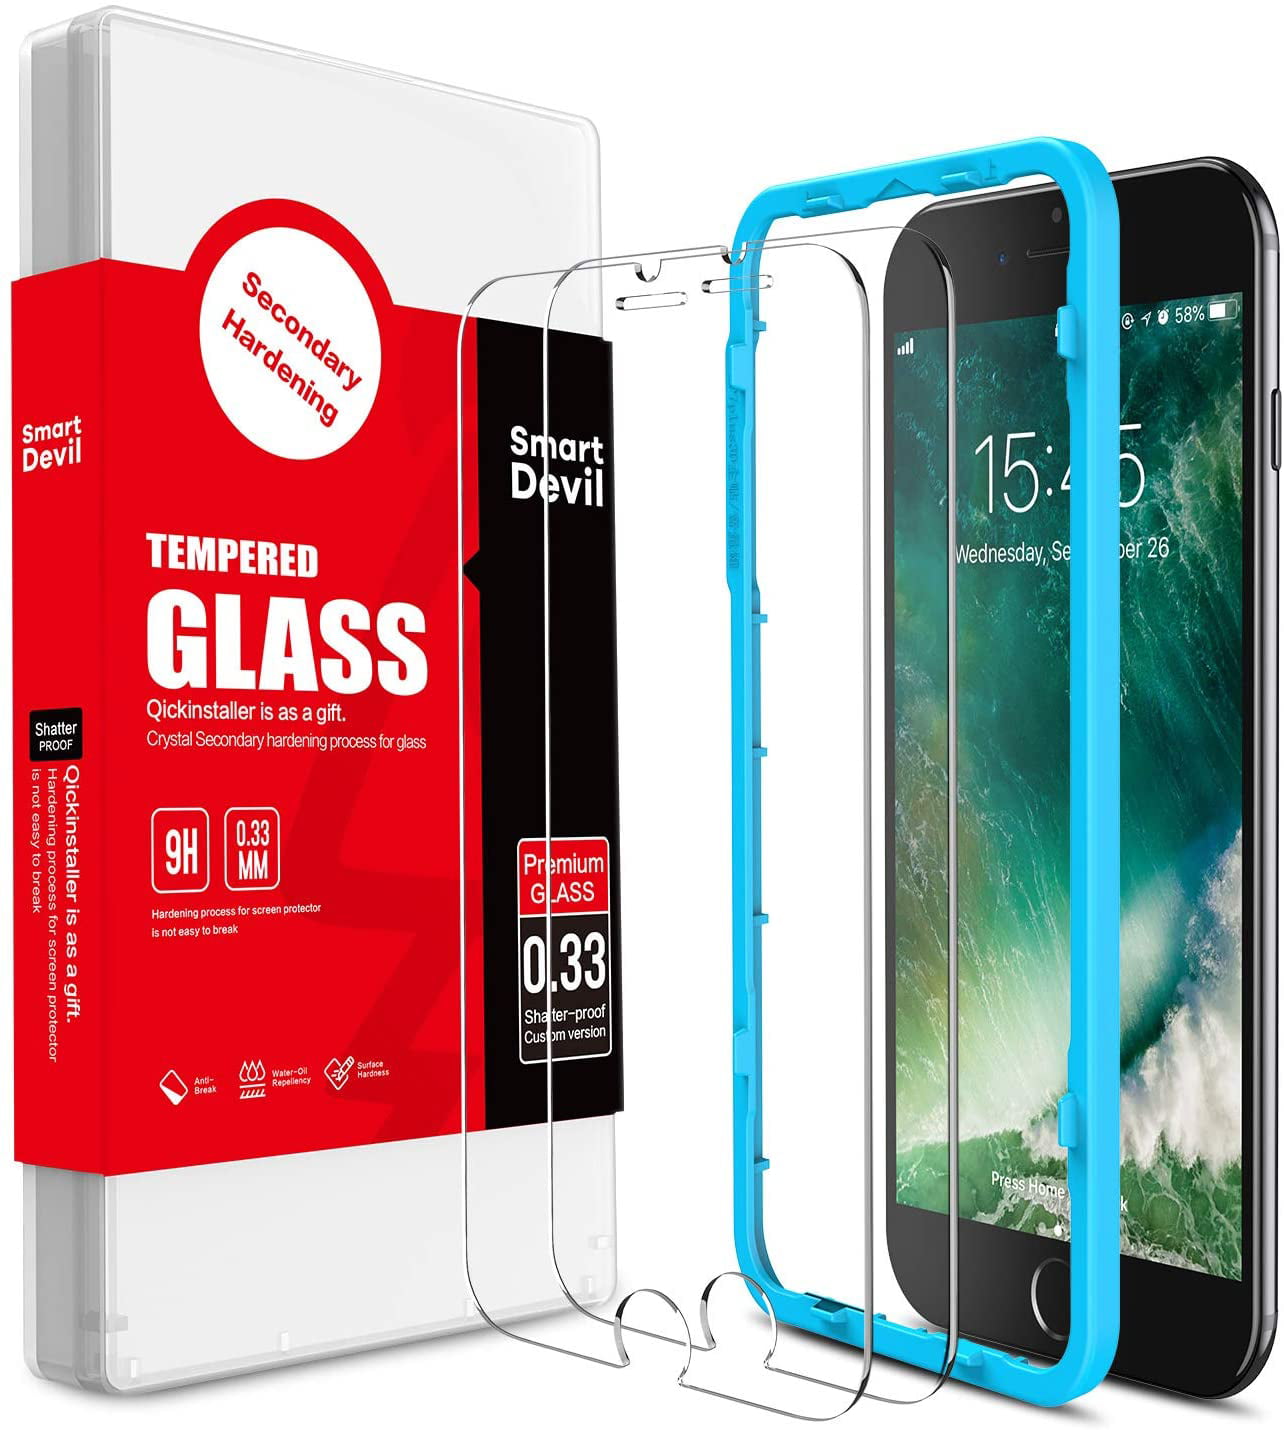 Ultra Thin 1 Pack 9H Hardness Screen Protector Film for Apple iPhone 6 Plus/6s Plus/8 Plus Bear Village® iPhone 6 Plus/6s Plus/7 Plus/8 Plus Tempered Glass Screen Protector Anti Scratches